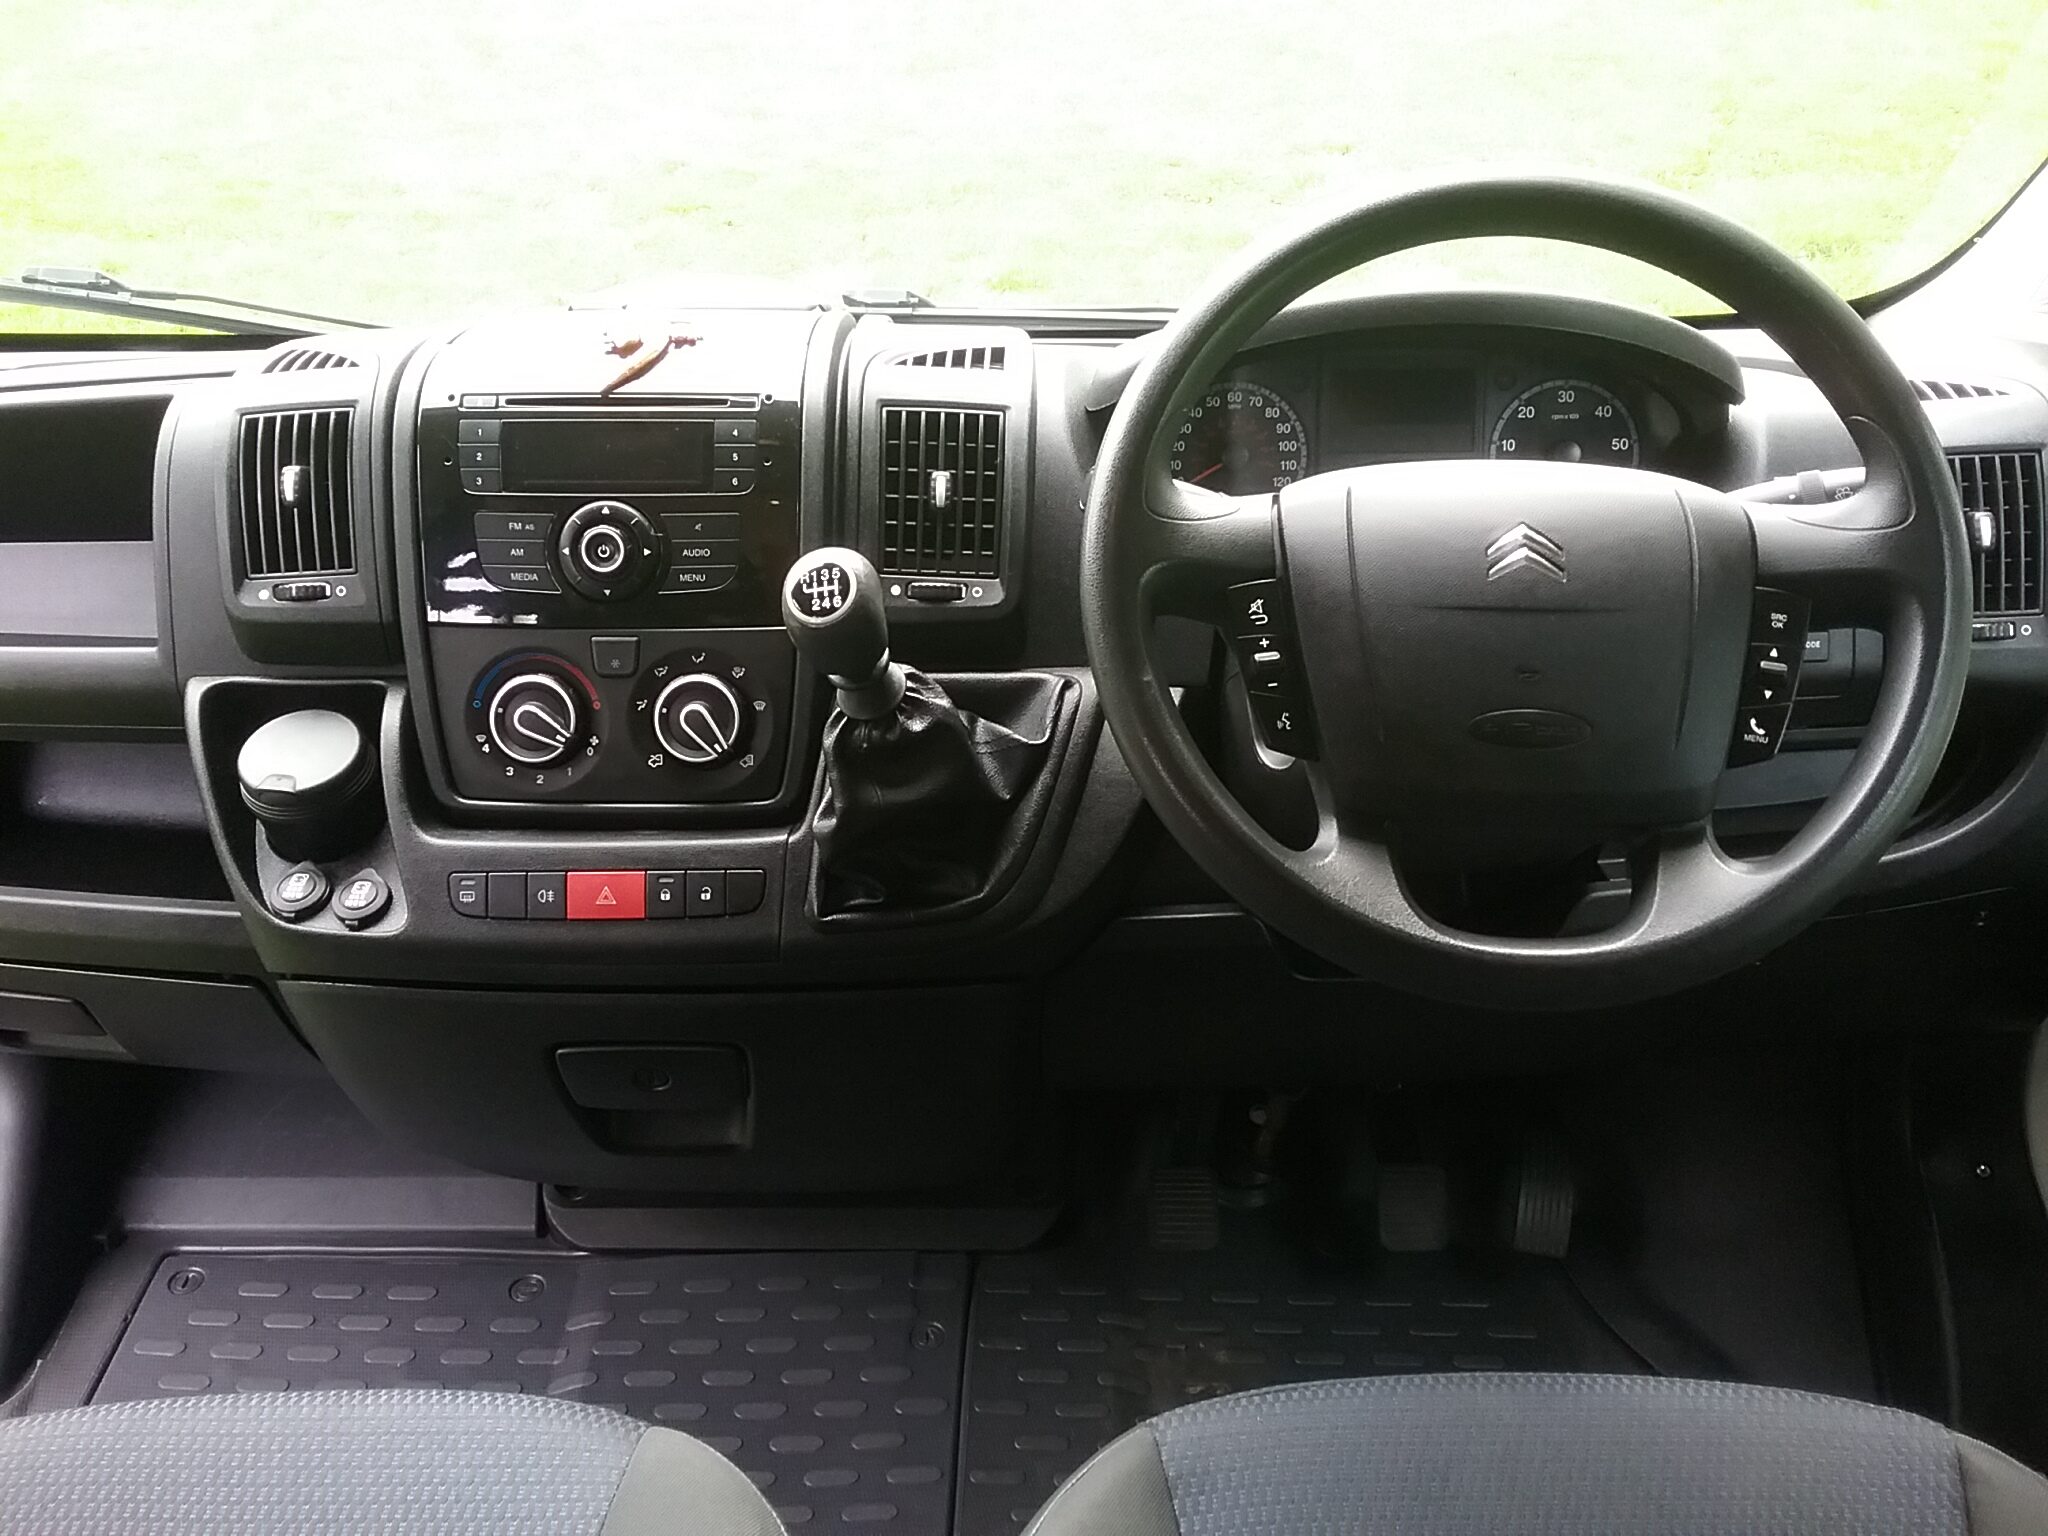 The image shows the interior of a Citroën vehicle's cockpit from the driver's perspective. It features a multifunction steering wheel, a central control panel with knobs and buttons for air conditioning and media, a gear stick, cup holders, and an instrument cluster behind the steering wheel.